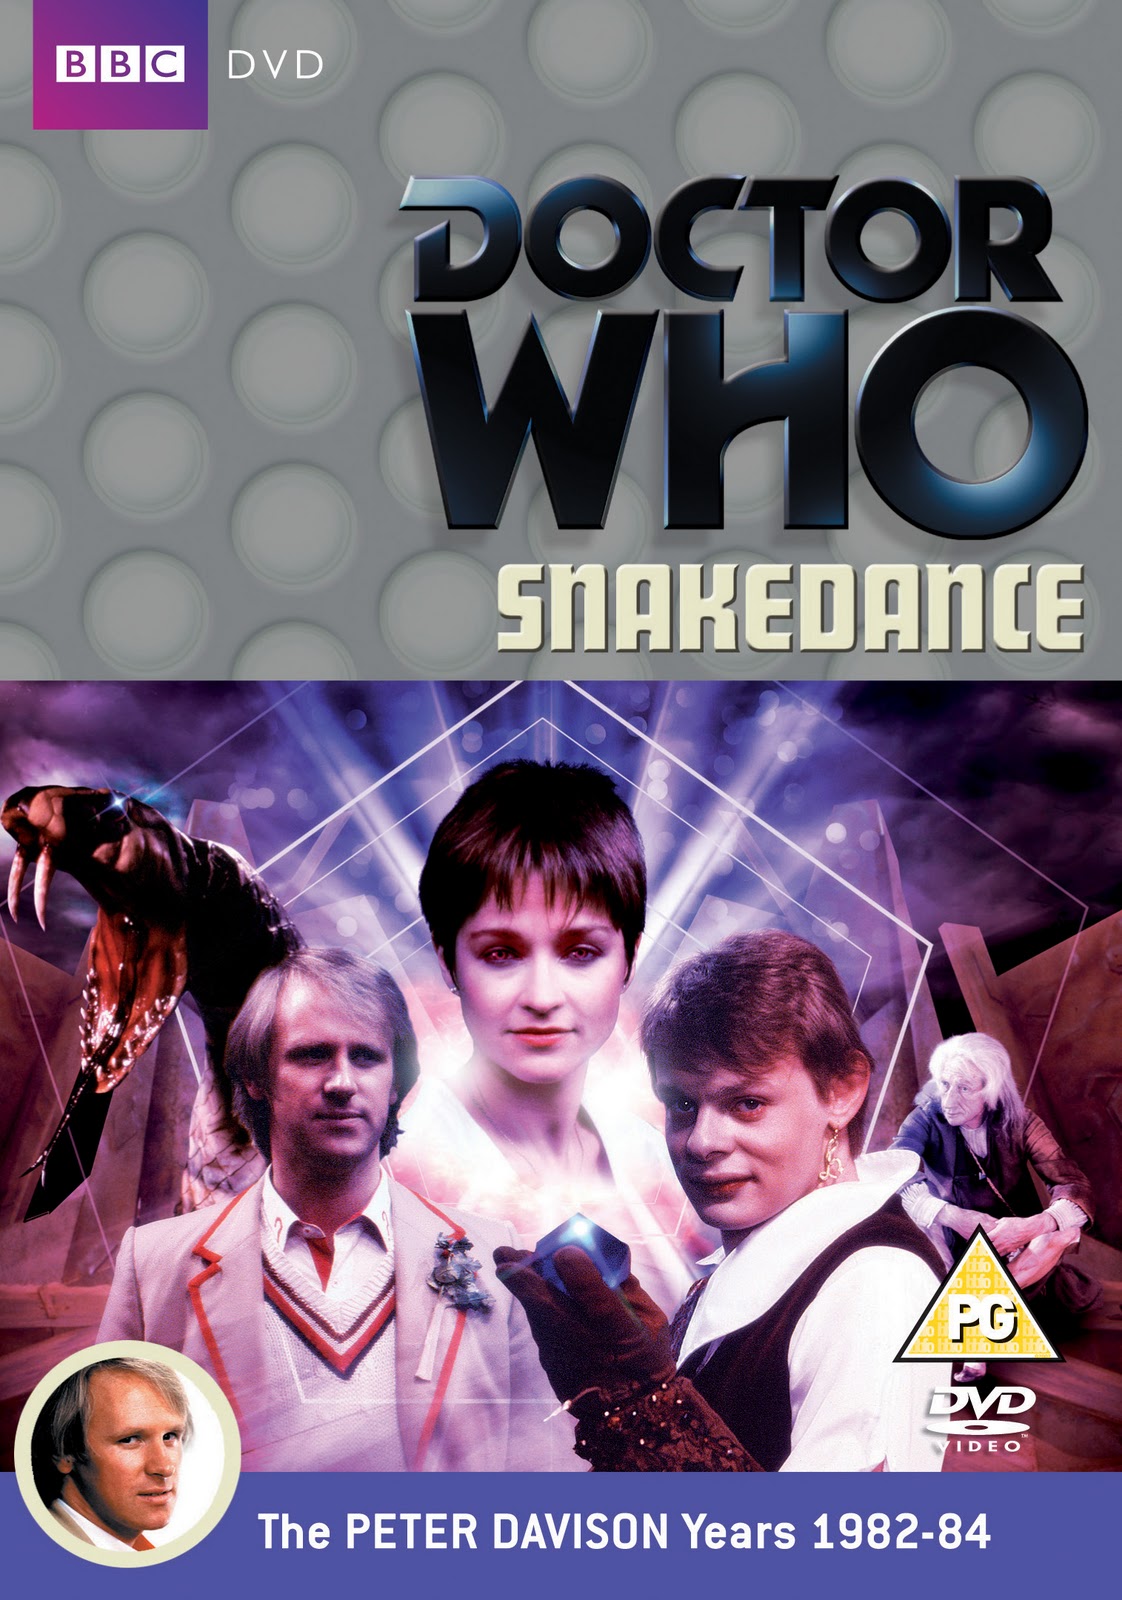 Picture of BBCDVD 2871B Doctor Who - Snakedance by artist Unknown from the BBC dvds - Records and Tapes library